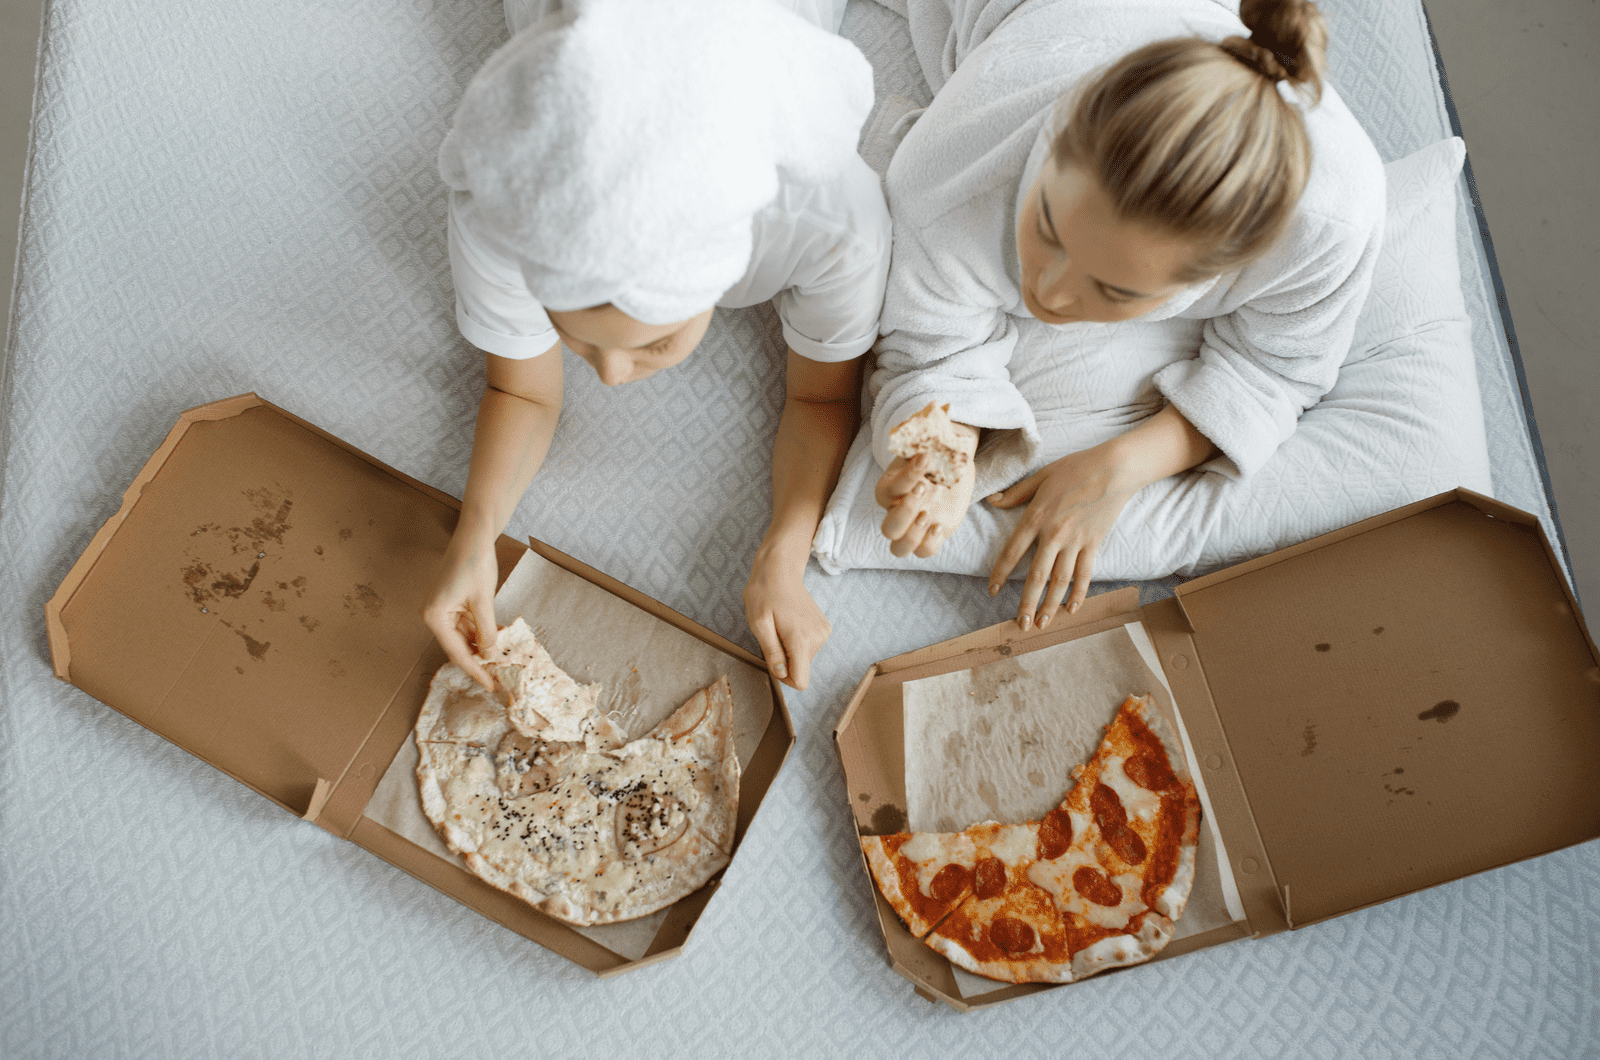 two girls in bathrobes lie on bed eating pizza and watching TV